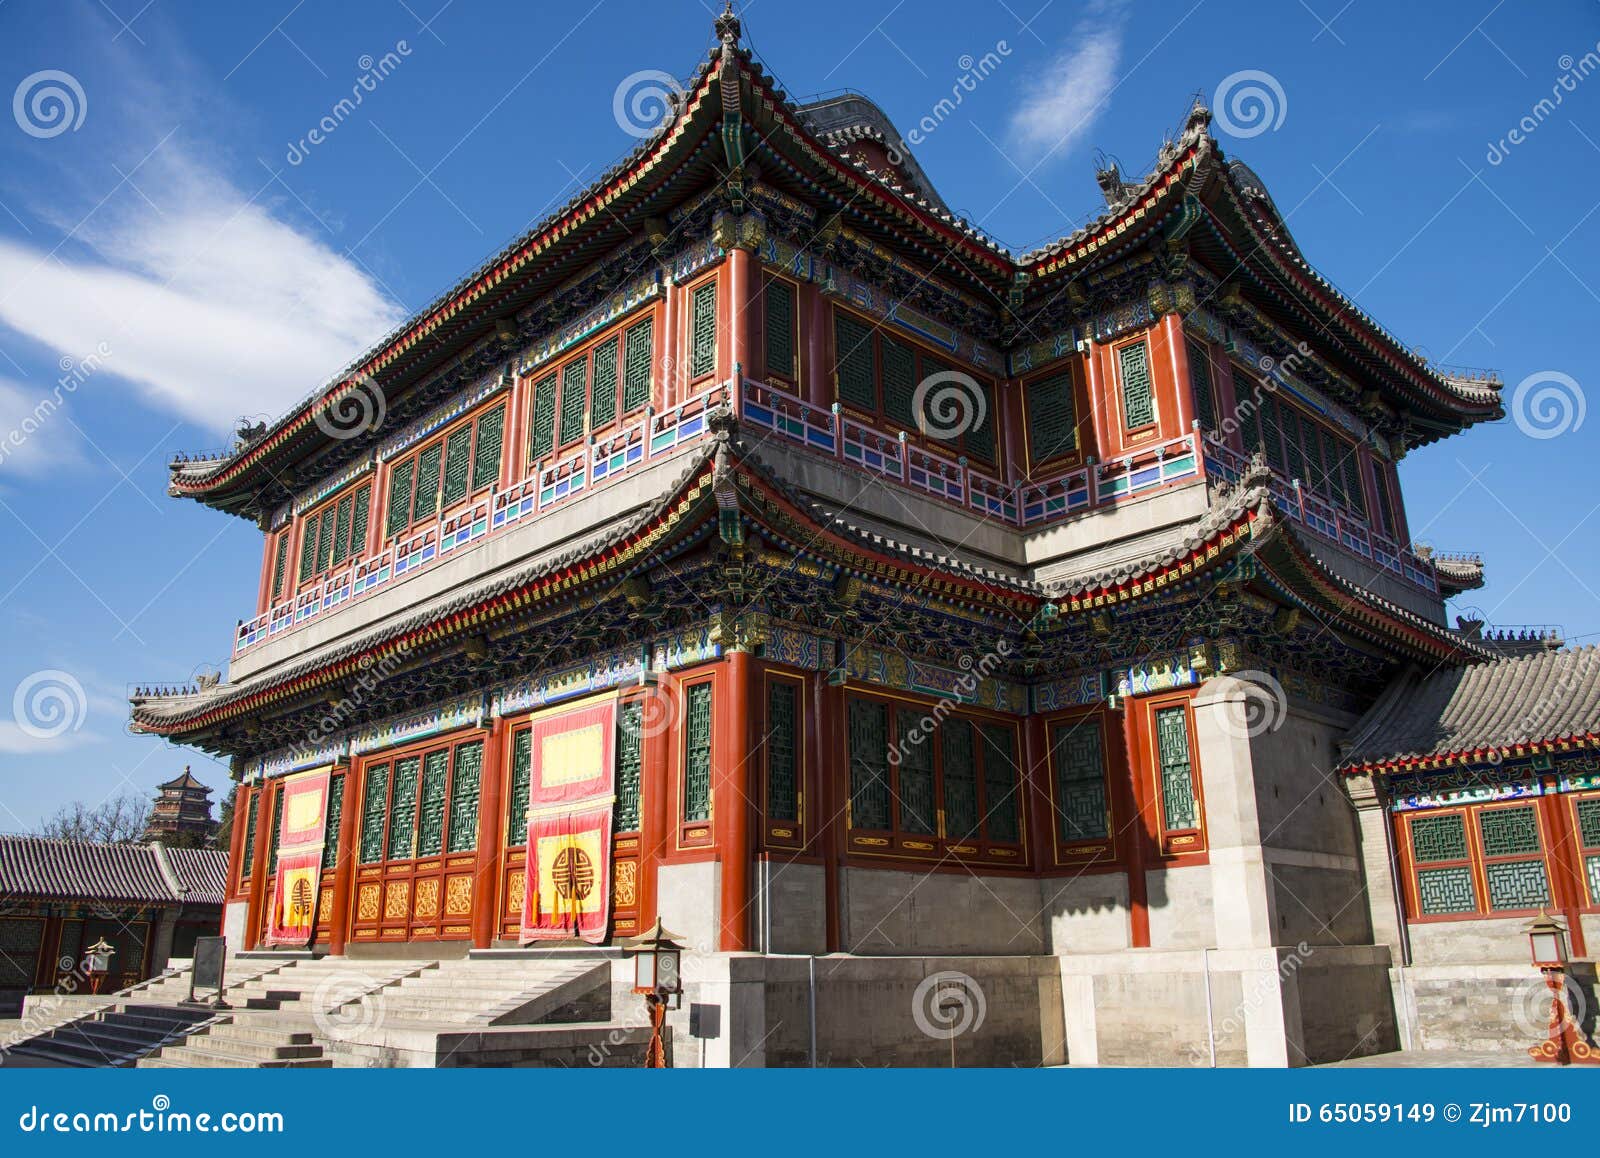 Asia China, Beijing, the Summer Palace, classical architecture, Heart and garden theater building. China and Asia, Beijing, the summer palace, the Royal Garden, classical architecture, heart and garden theater building is the largest existing ancient Chinese theater.